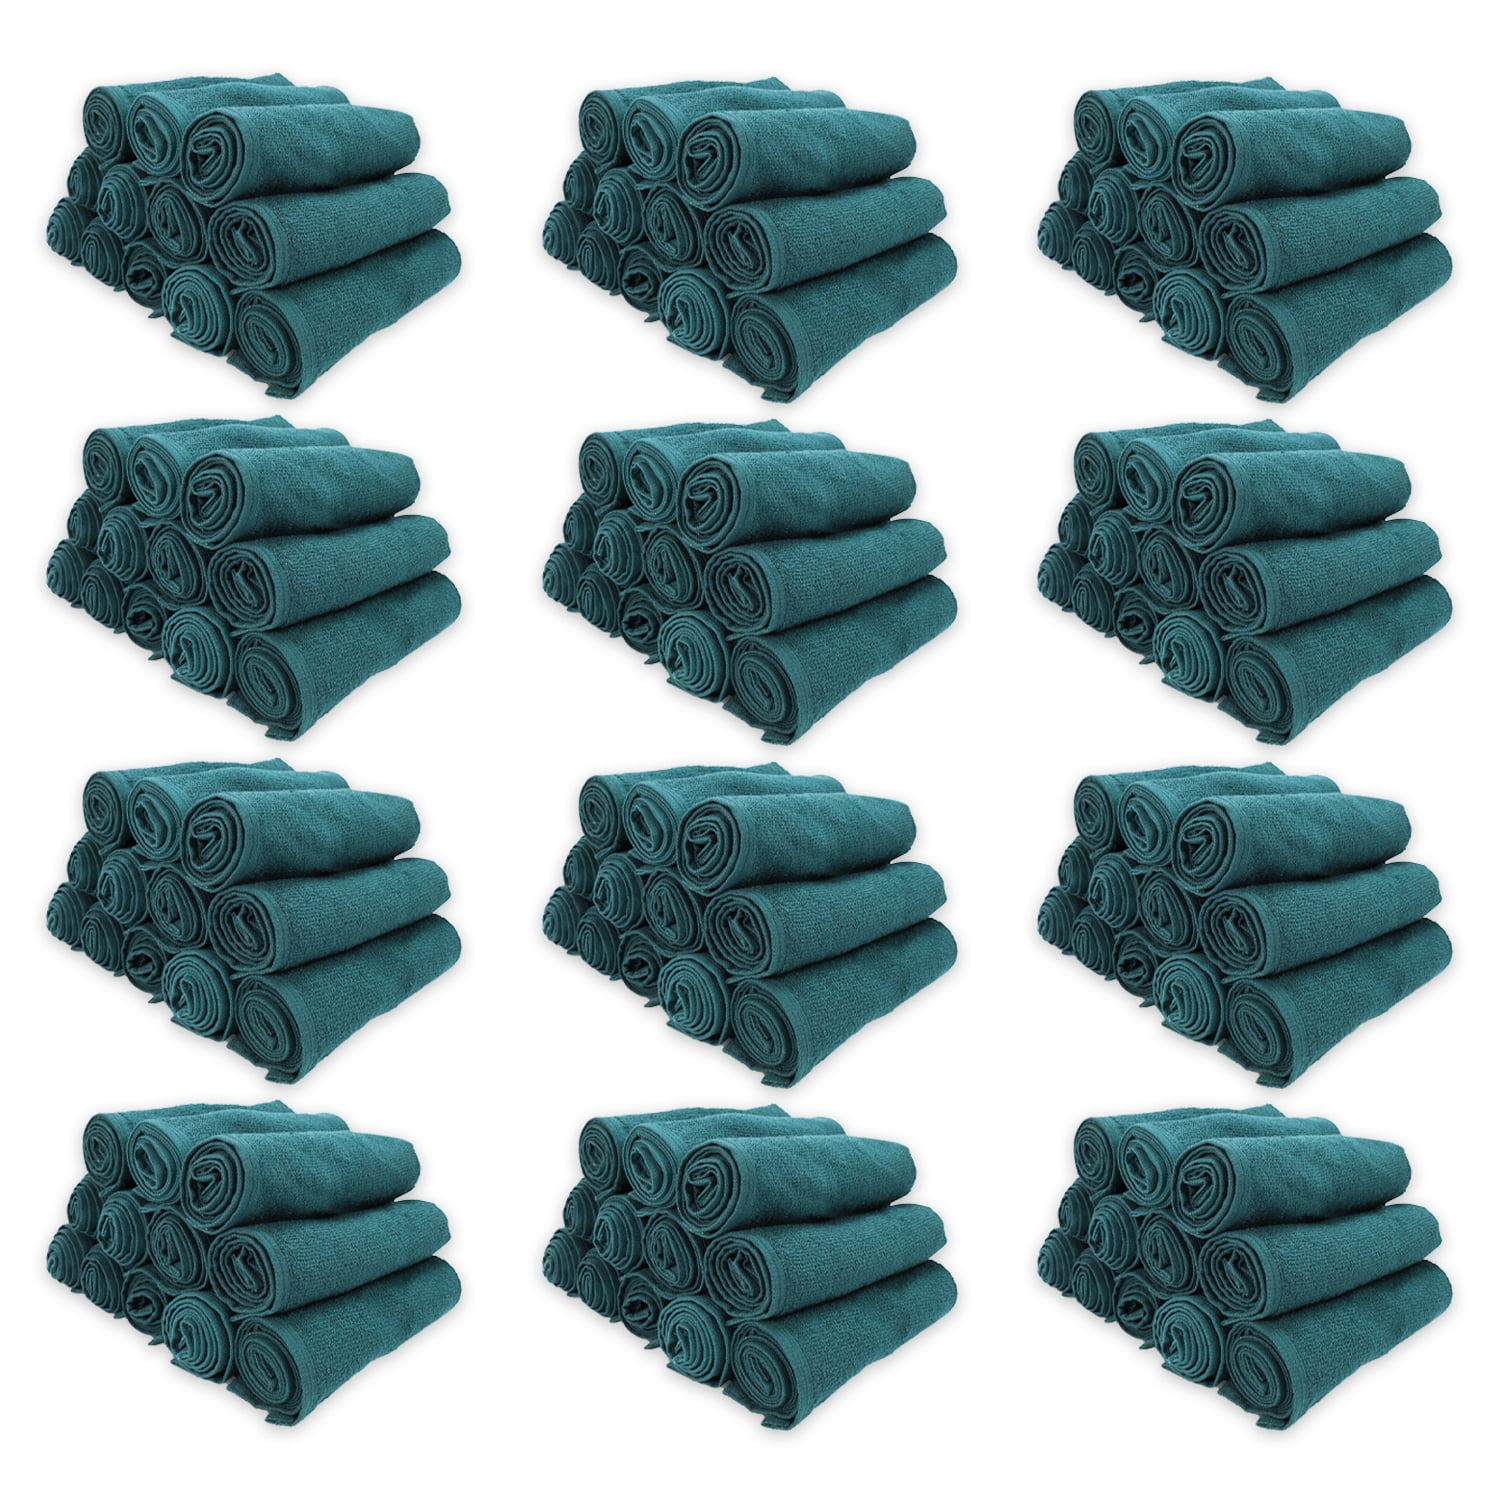 Cotton Salon Towel (16 X 27 Inches) Best Sellers